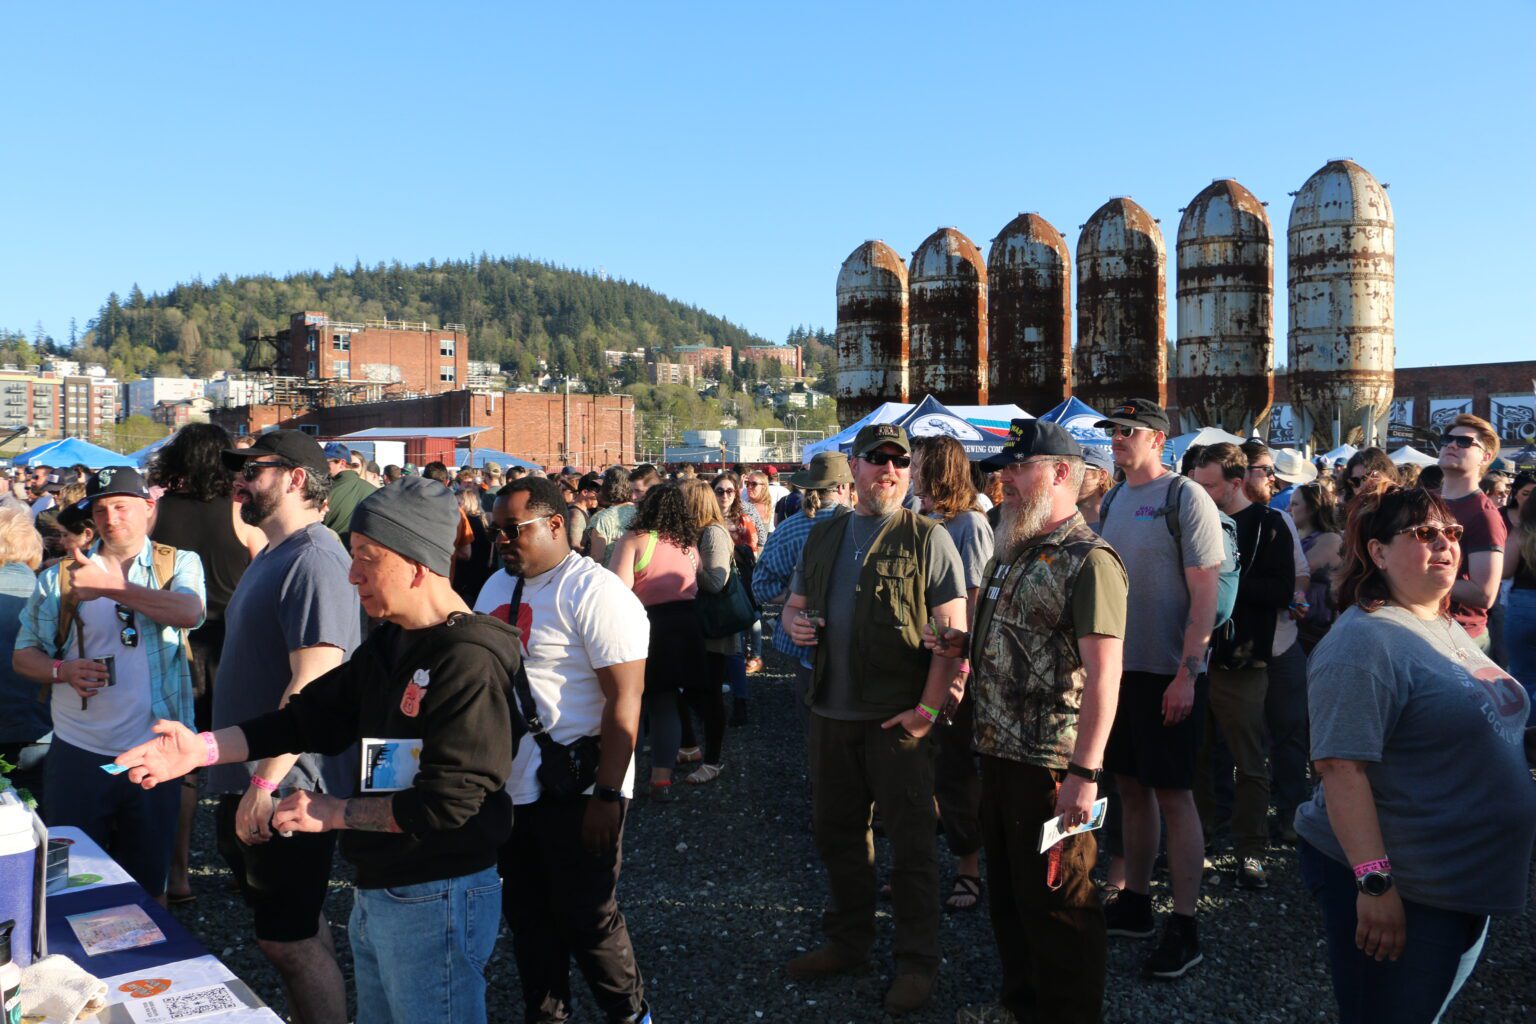 Attendees line up to receive a taste of beer from Birdsview Brewing Company during the April Brews Day festival April 29 at Bellingham's downtown waterfront. The festival returned after a three-year hiatus following the pandemic.